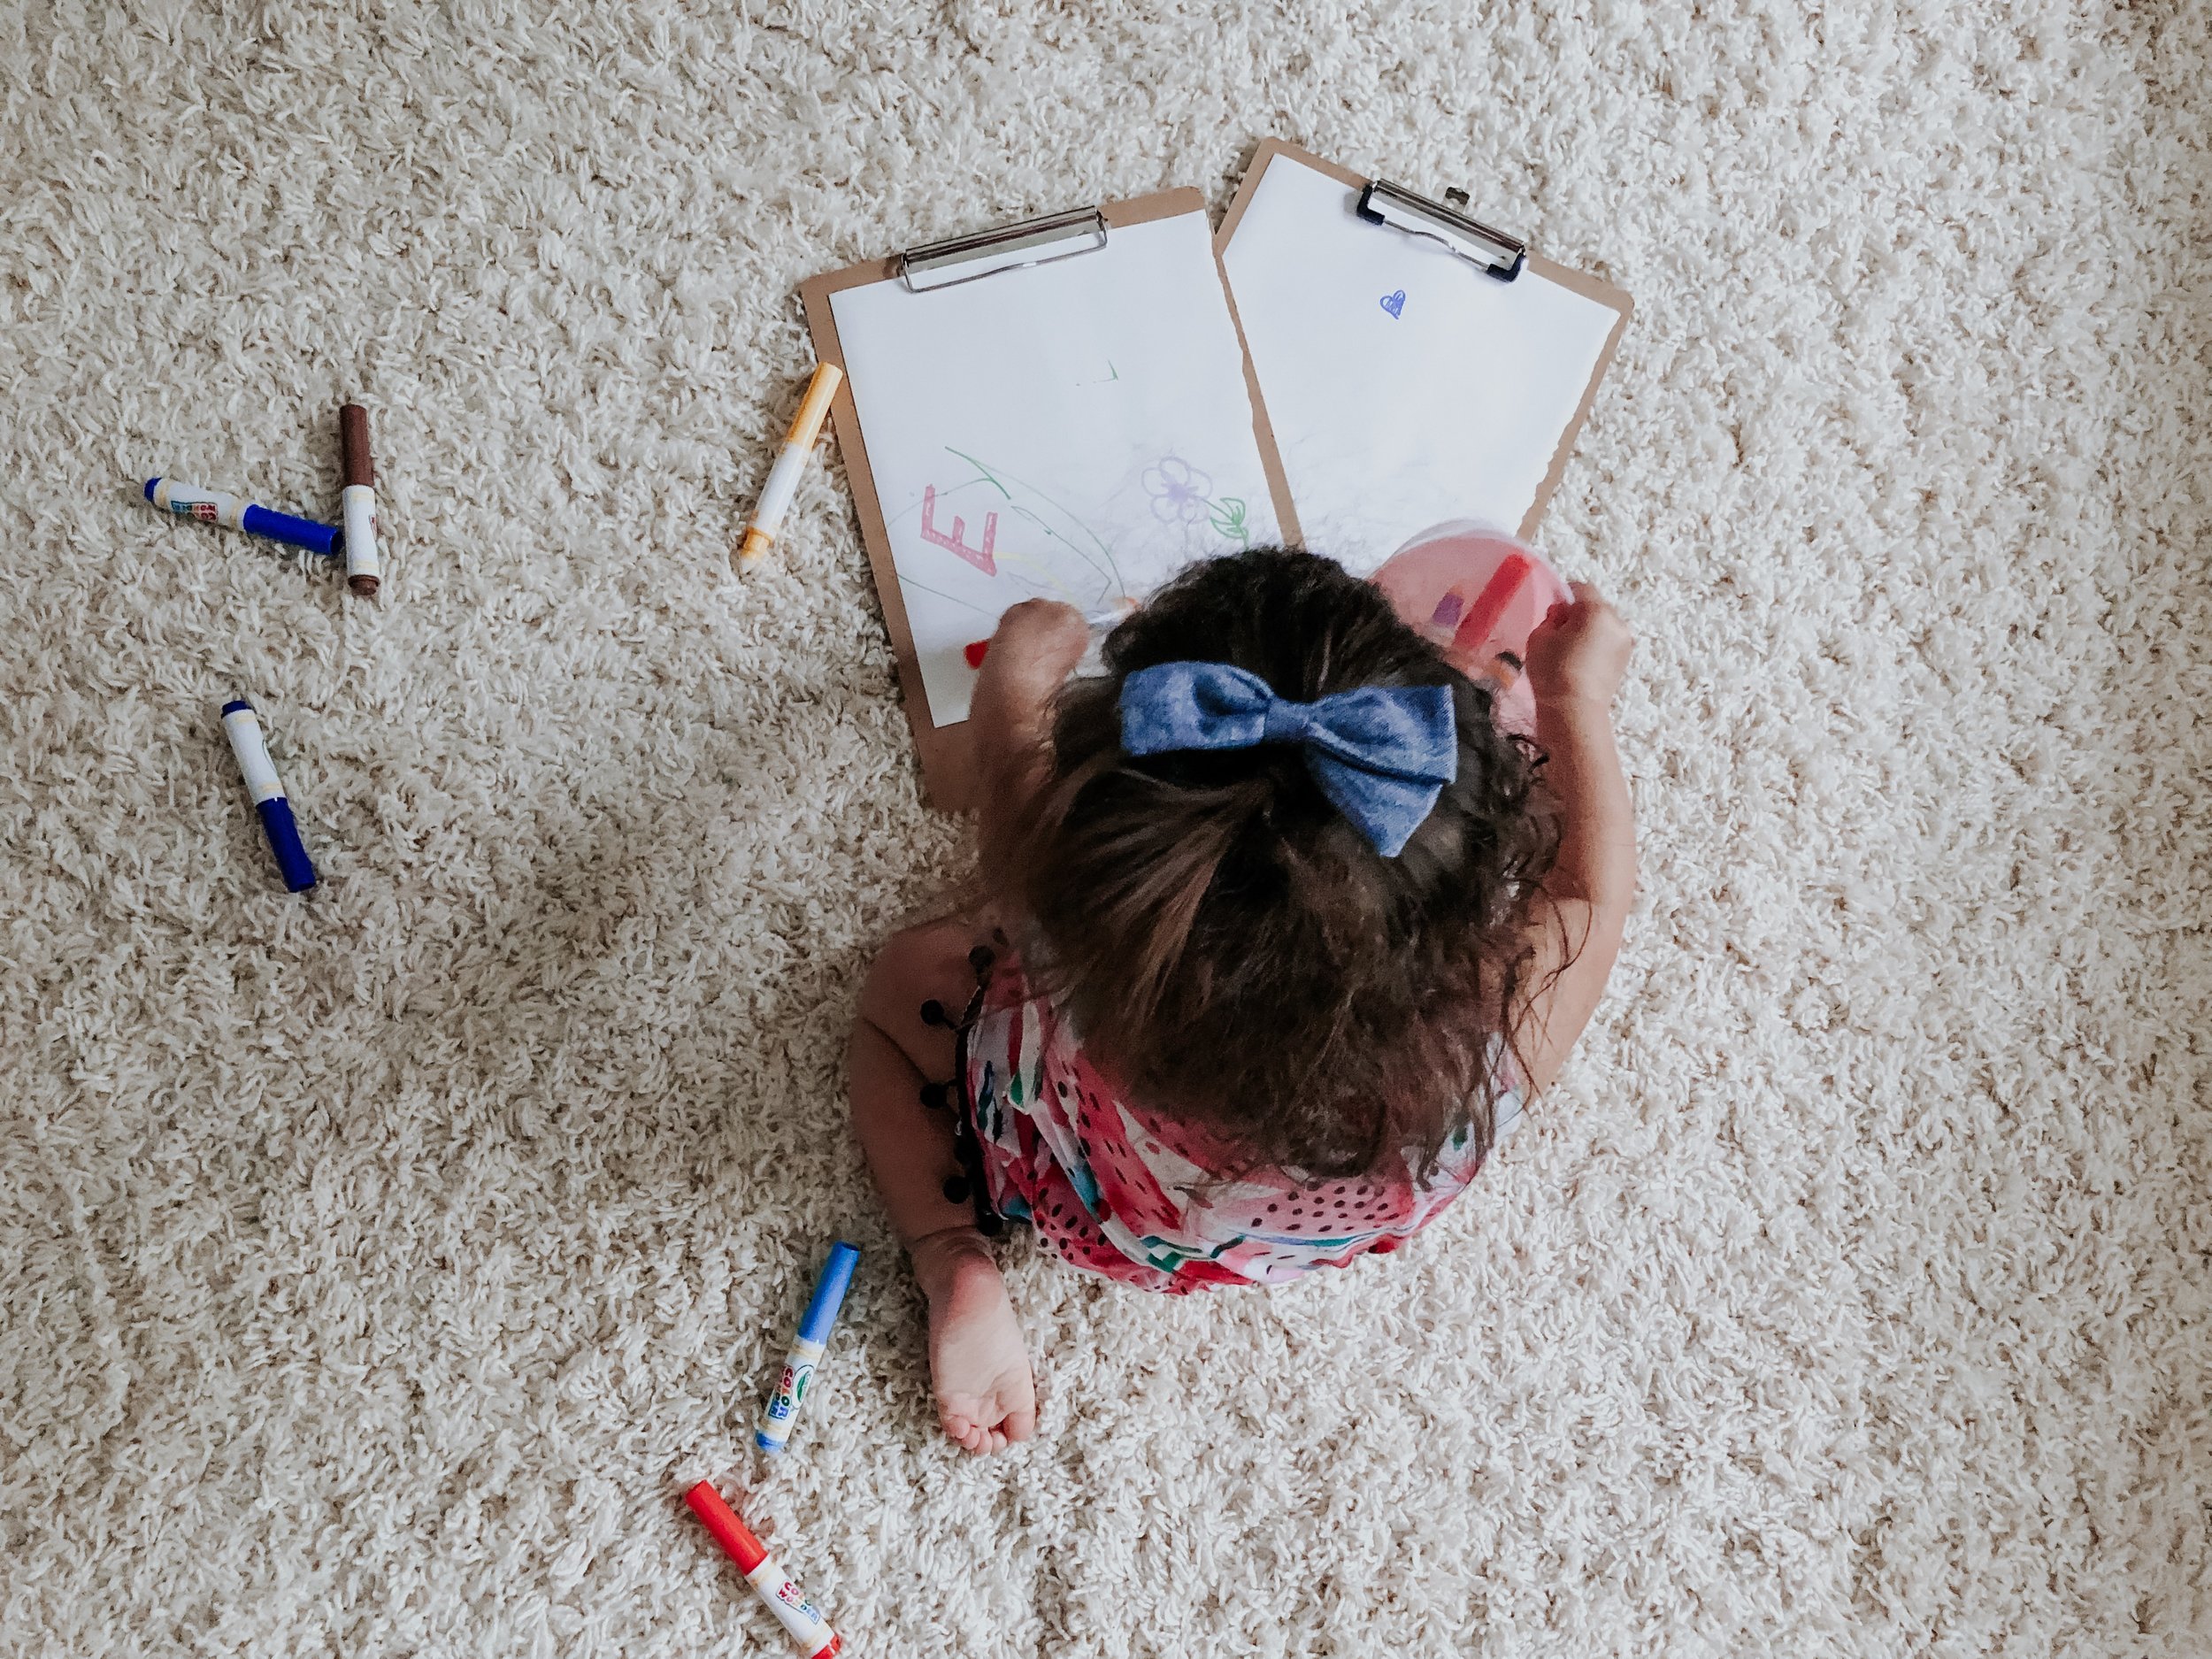 The Best Markers for Little Kids (Plus, They're Mess Free!)